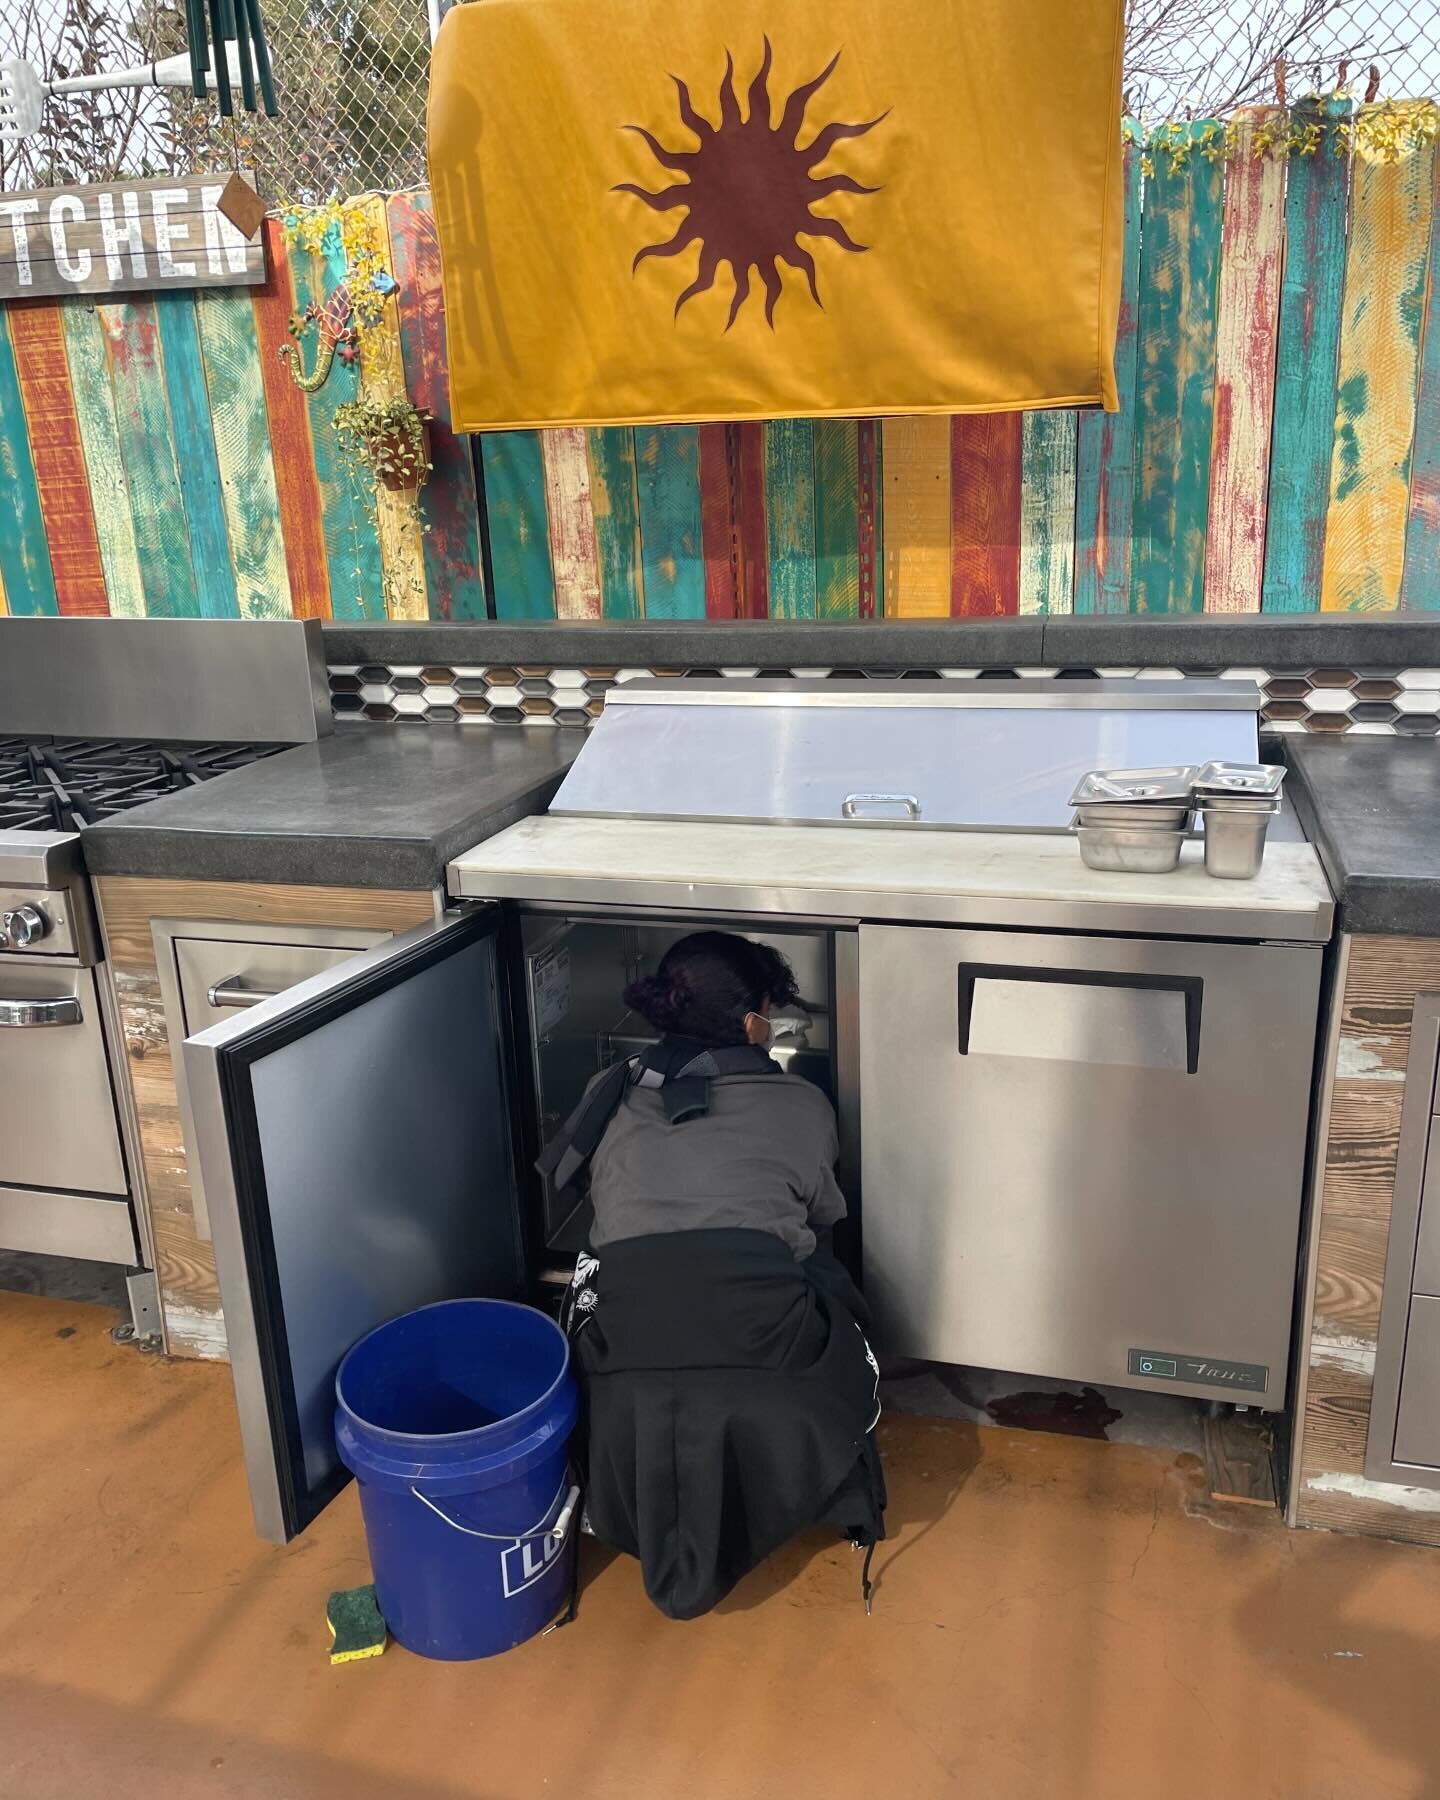 Welcome back to Quarter 3, Abraxas Garden Kitchen! These kids aren&rsquo;t afraid of hard, dirty work. We will be open for business as usual next week. Our New Year&rsquo;s Resolution is to organize and simplify. Yaya! Let&rsquo;s go!